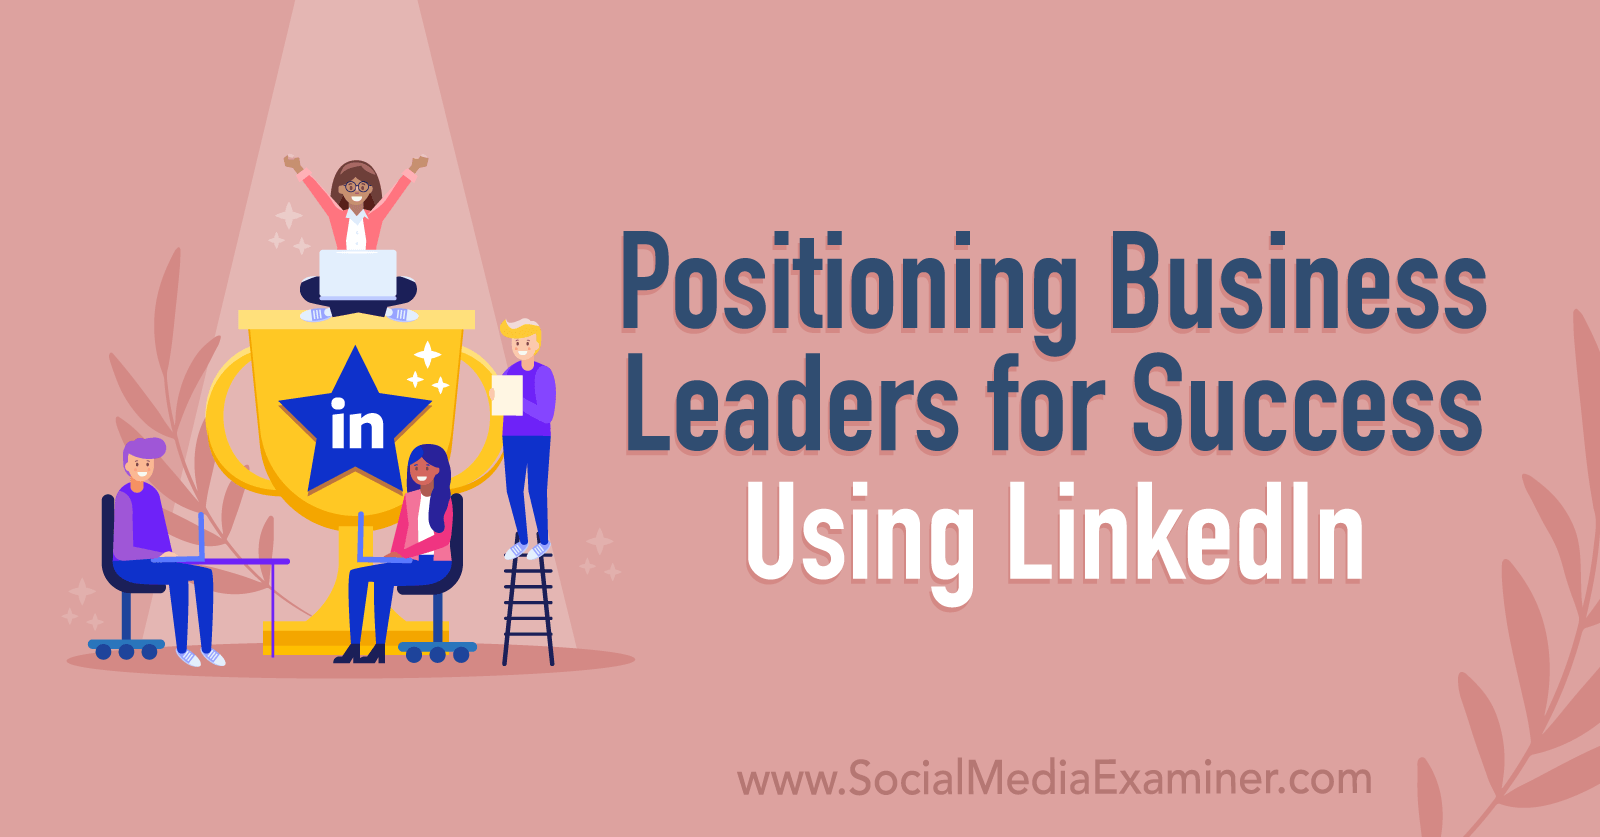 Positioning Business Leaders for Success Using LinkedIn by Social Media Examiner